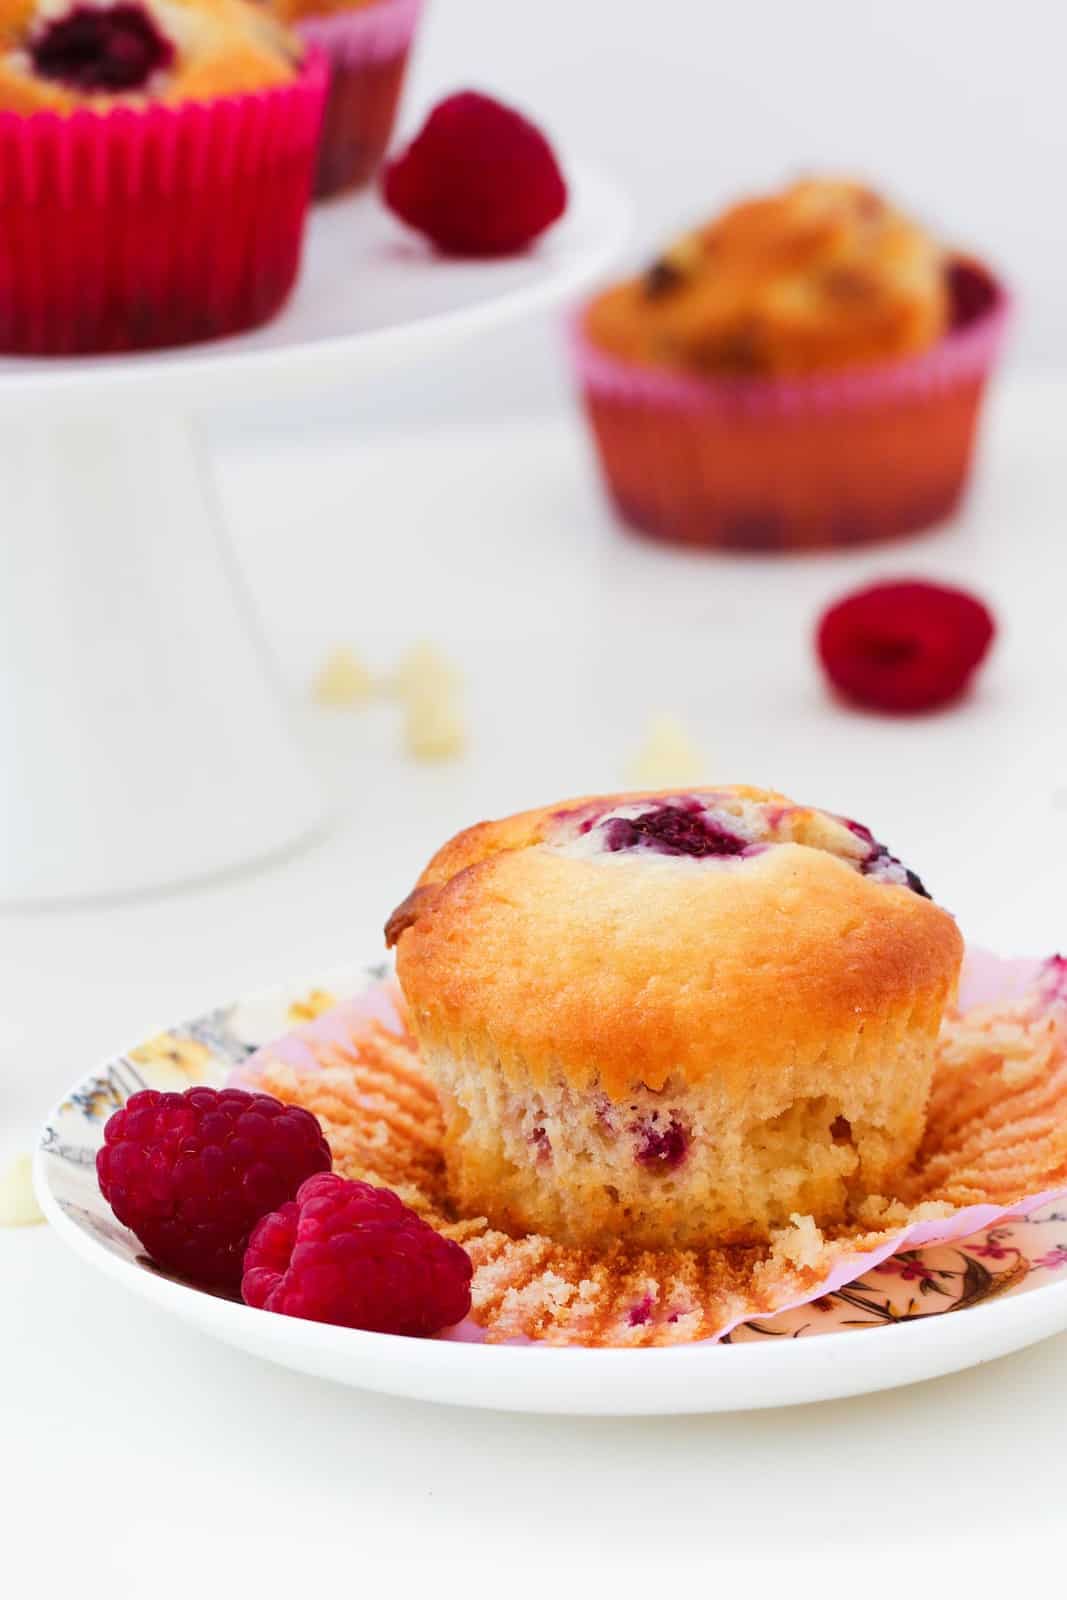 A berry muffin with the paper case opened and served with fresh raspberries on a floral plate.